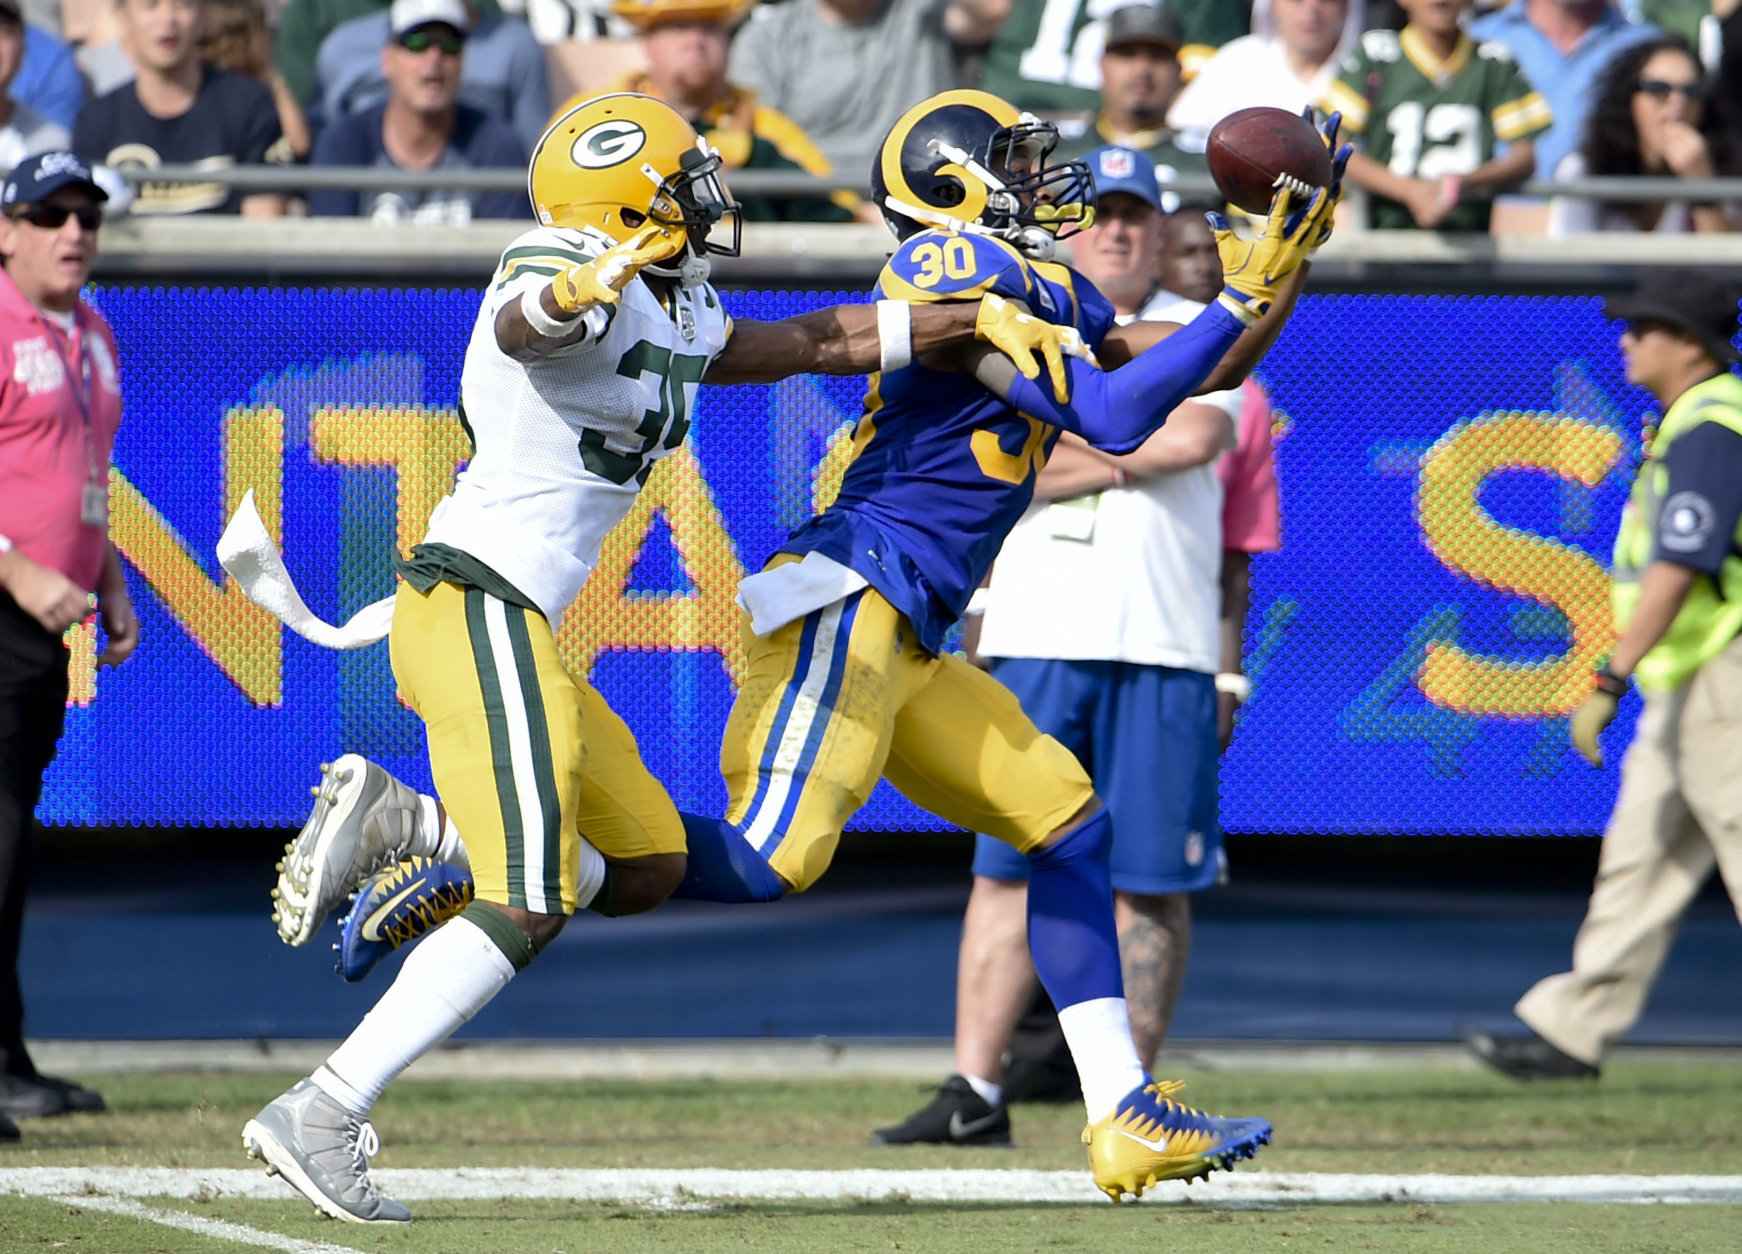 Los Angeles Rams running back Todd Gurley, right, makes a catch as Green Bay Packers defensive back Jermaine Whitehead defends during the first half of an NFL football game, Sunday, Oct. 28, 2018, in Los Angeles. (AP Photo/Denis Poroy)